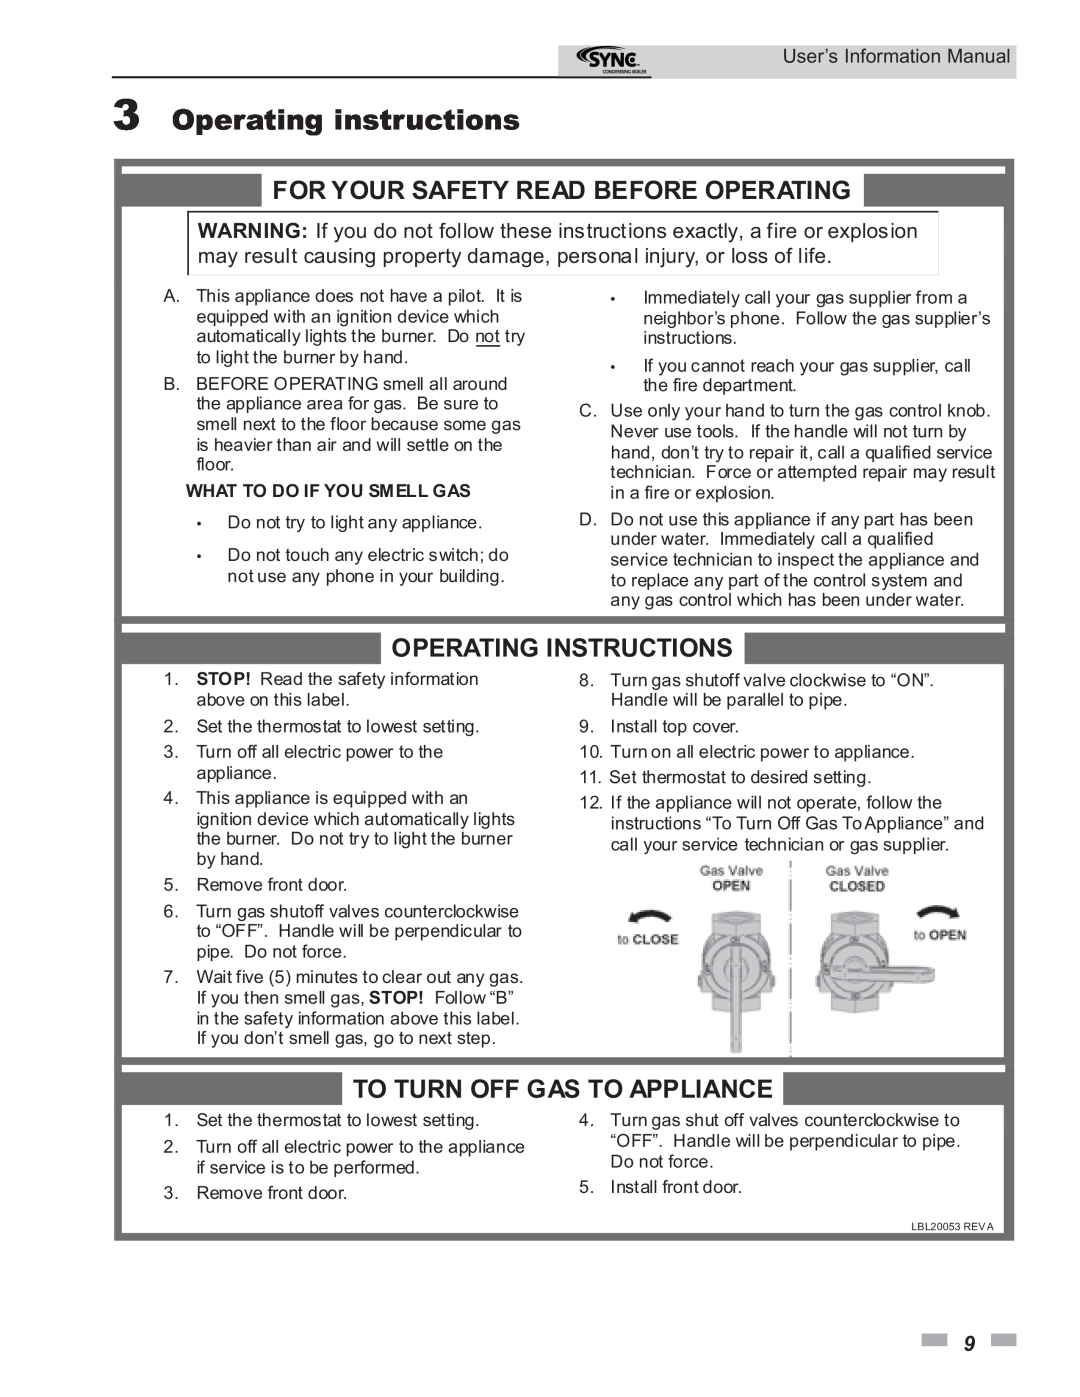 Lochinvar 1.3, 1.5 manual 3Operating instructions, For Your Safety Read Before Operating, Operating Instructions 